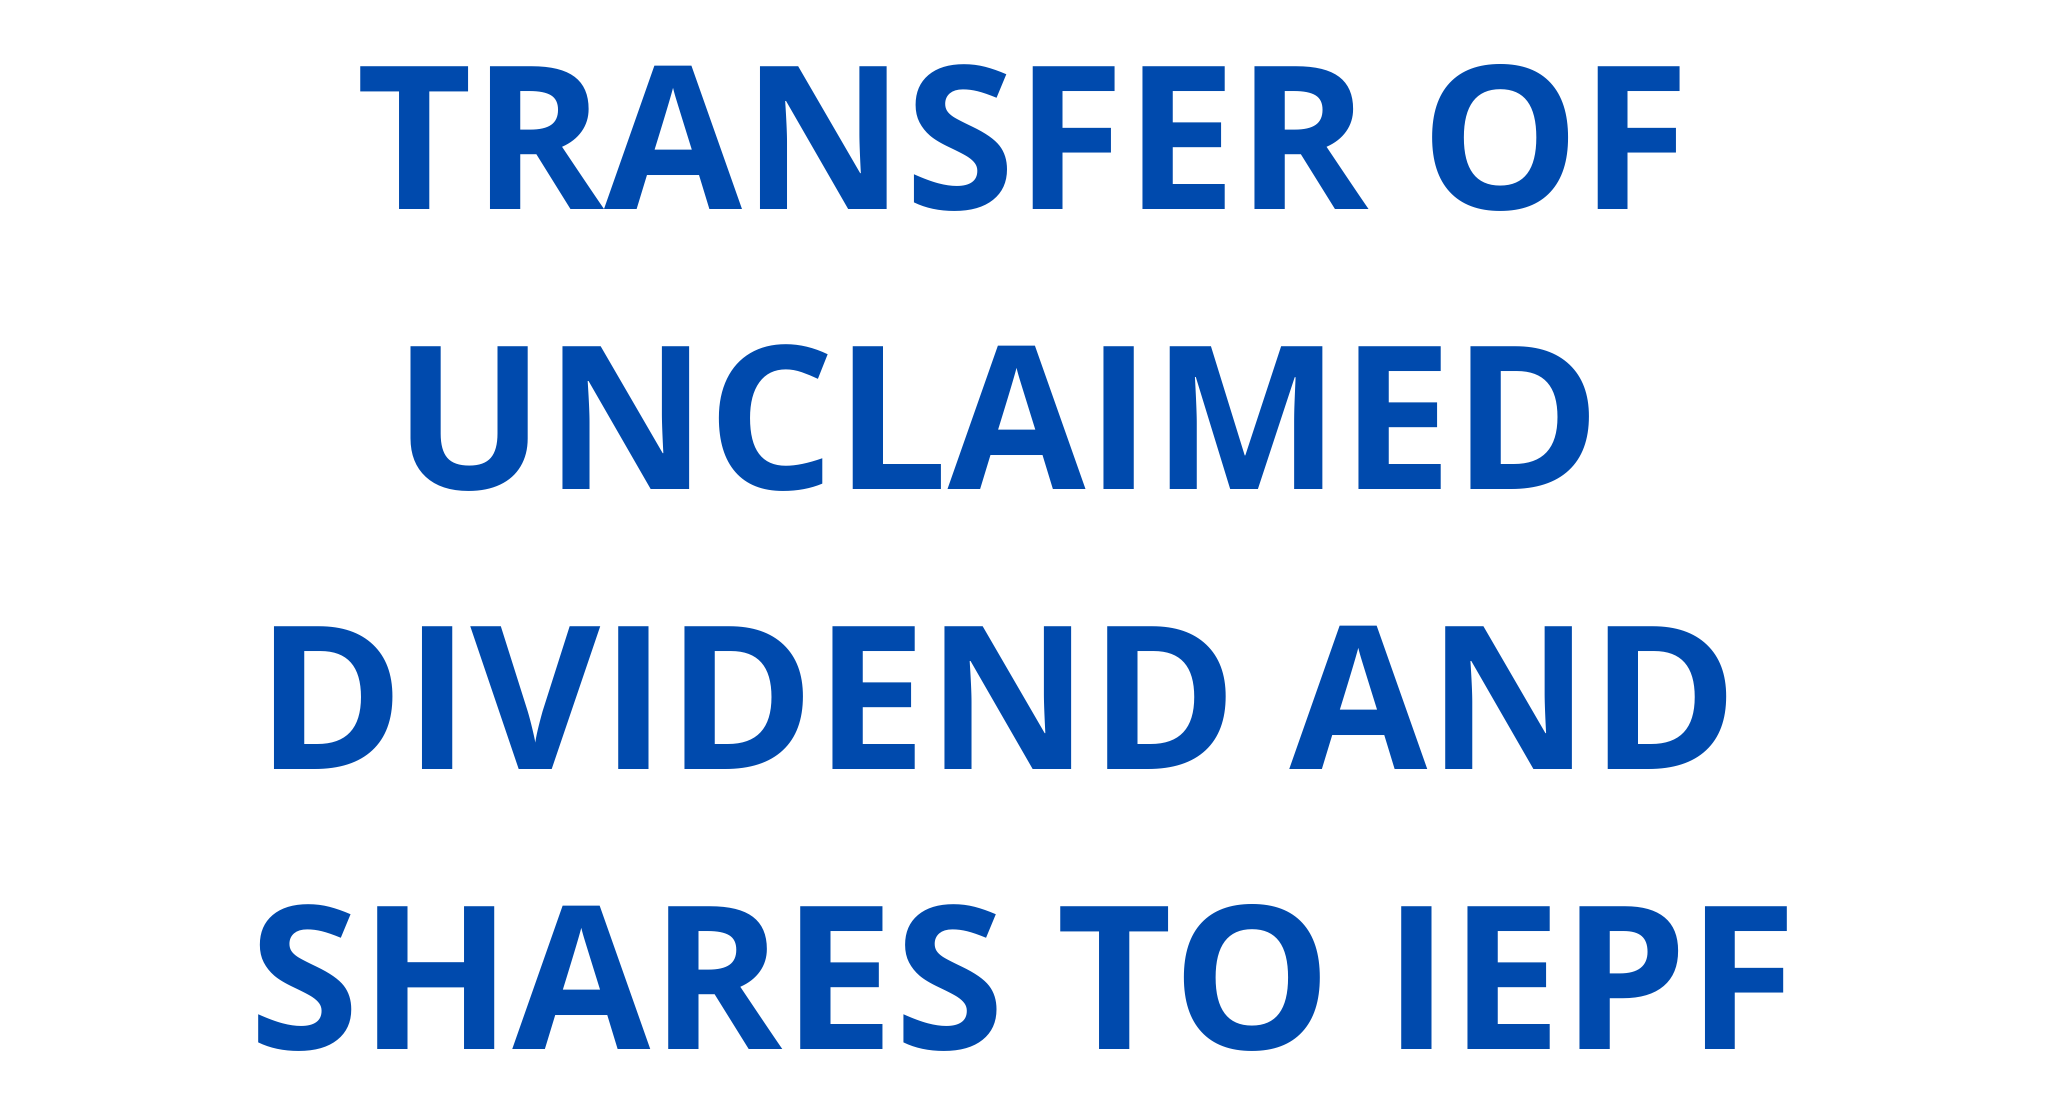 TRANSFER OF UNCLAIMED DIVIDEND AND SHARES TO IEPF